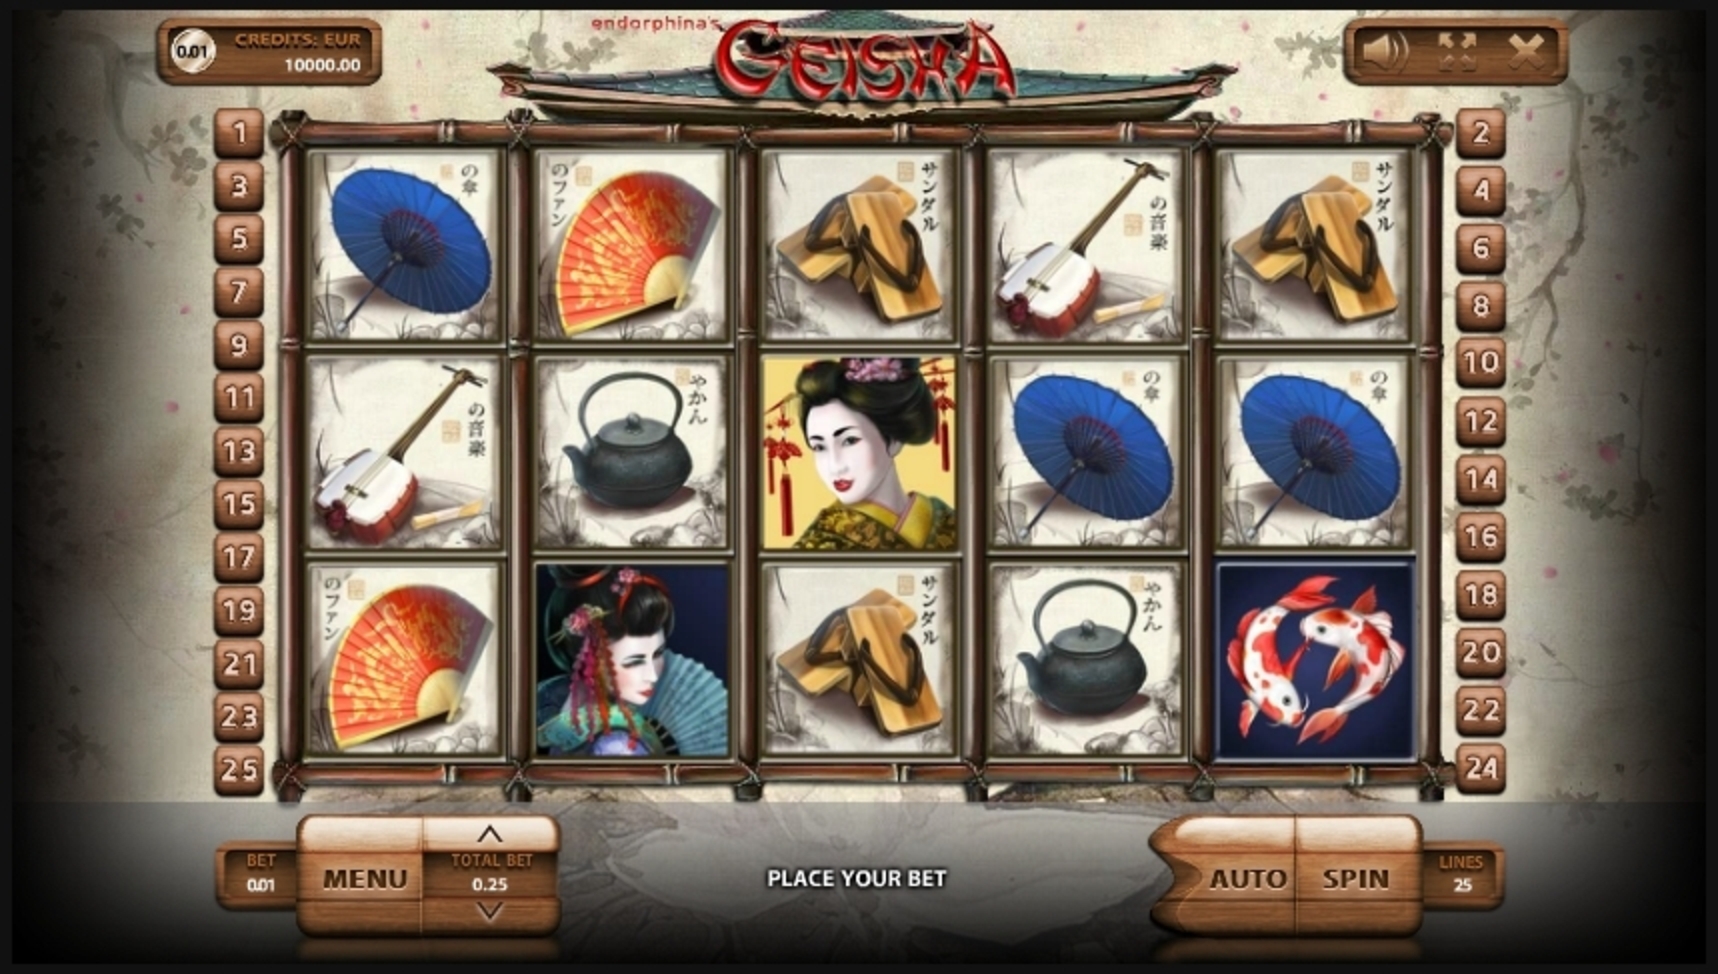 Reels in Geisha Slot Game by Endorphina